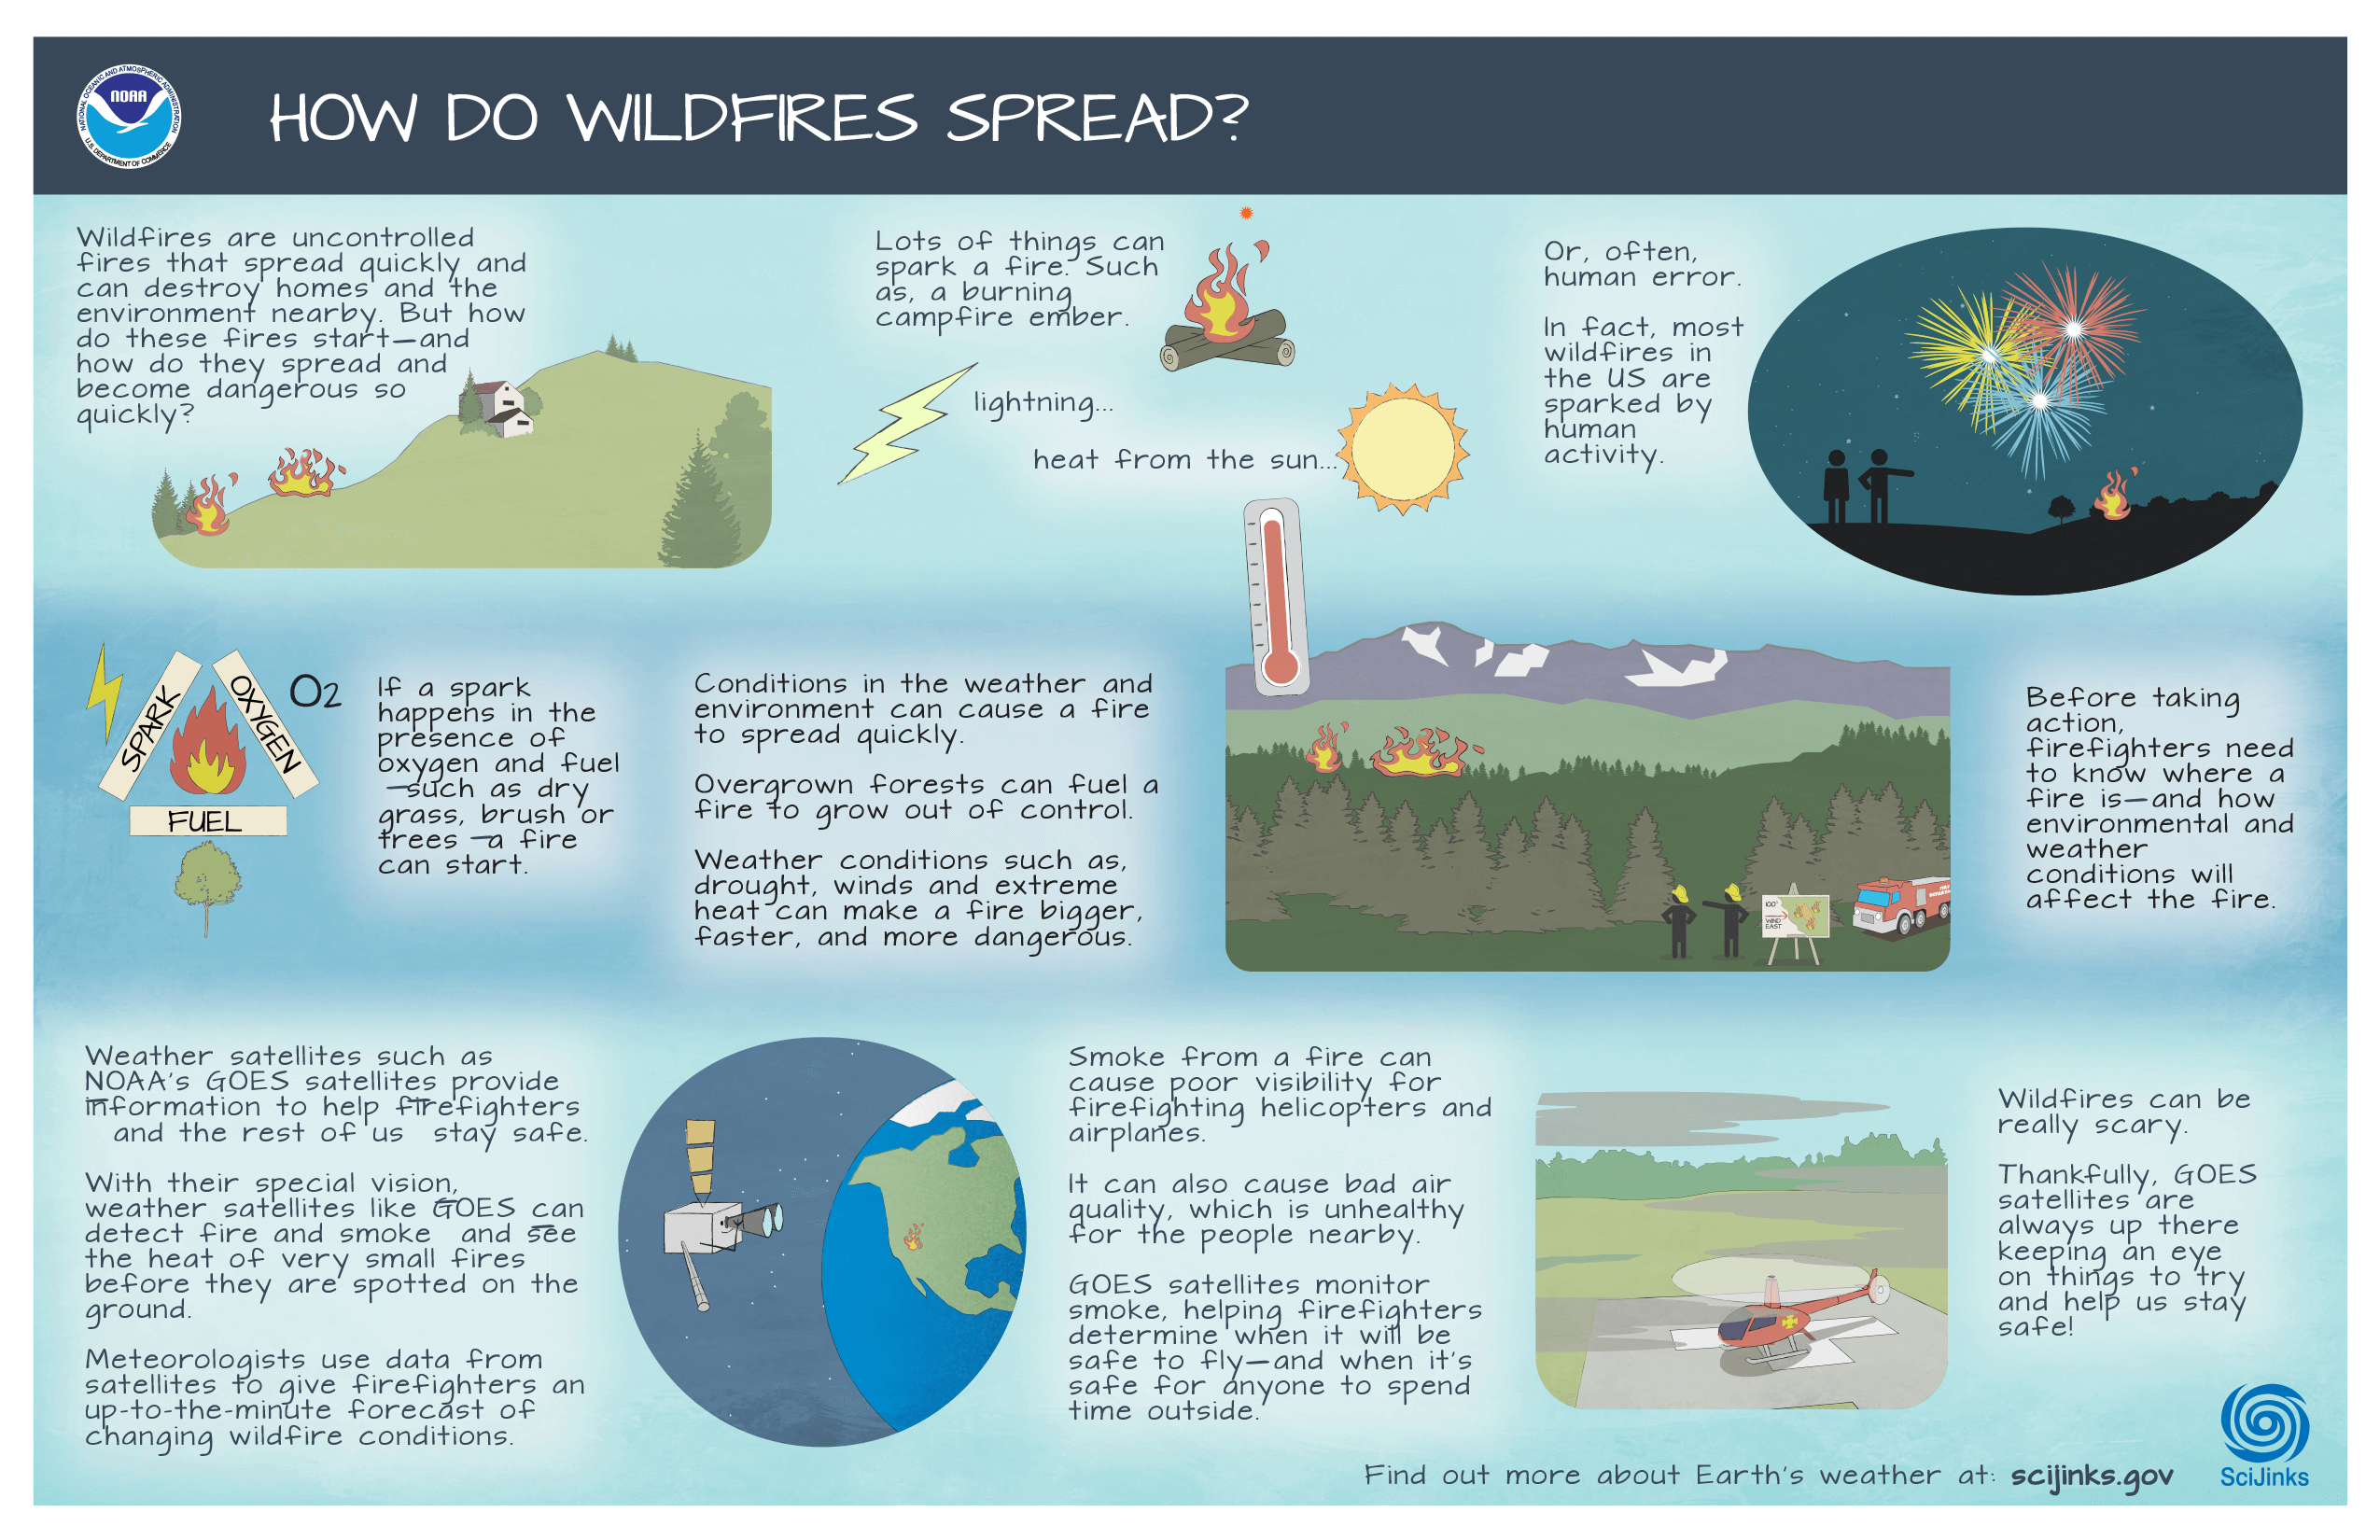 Thumbnail of How Do Wildfires Spread? infographic available for download.